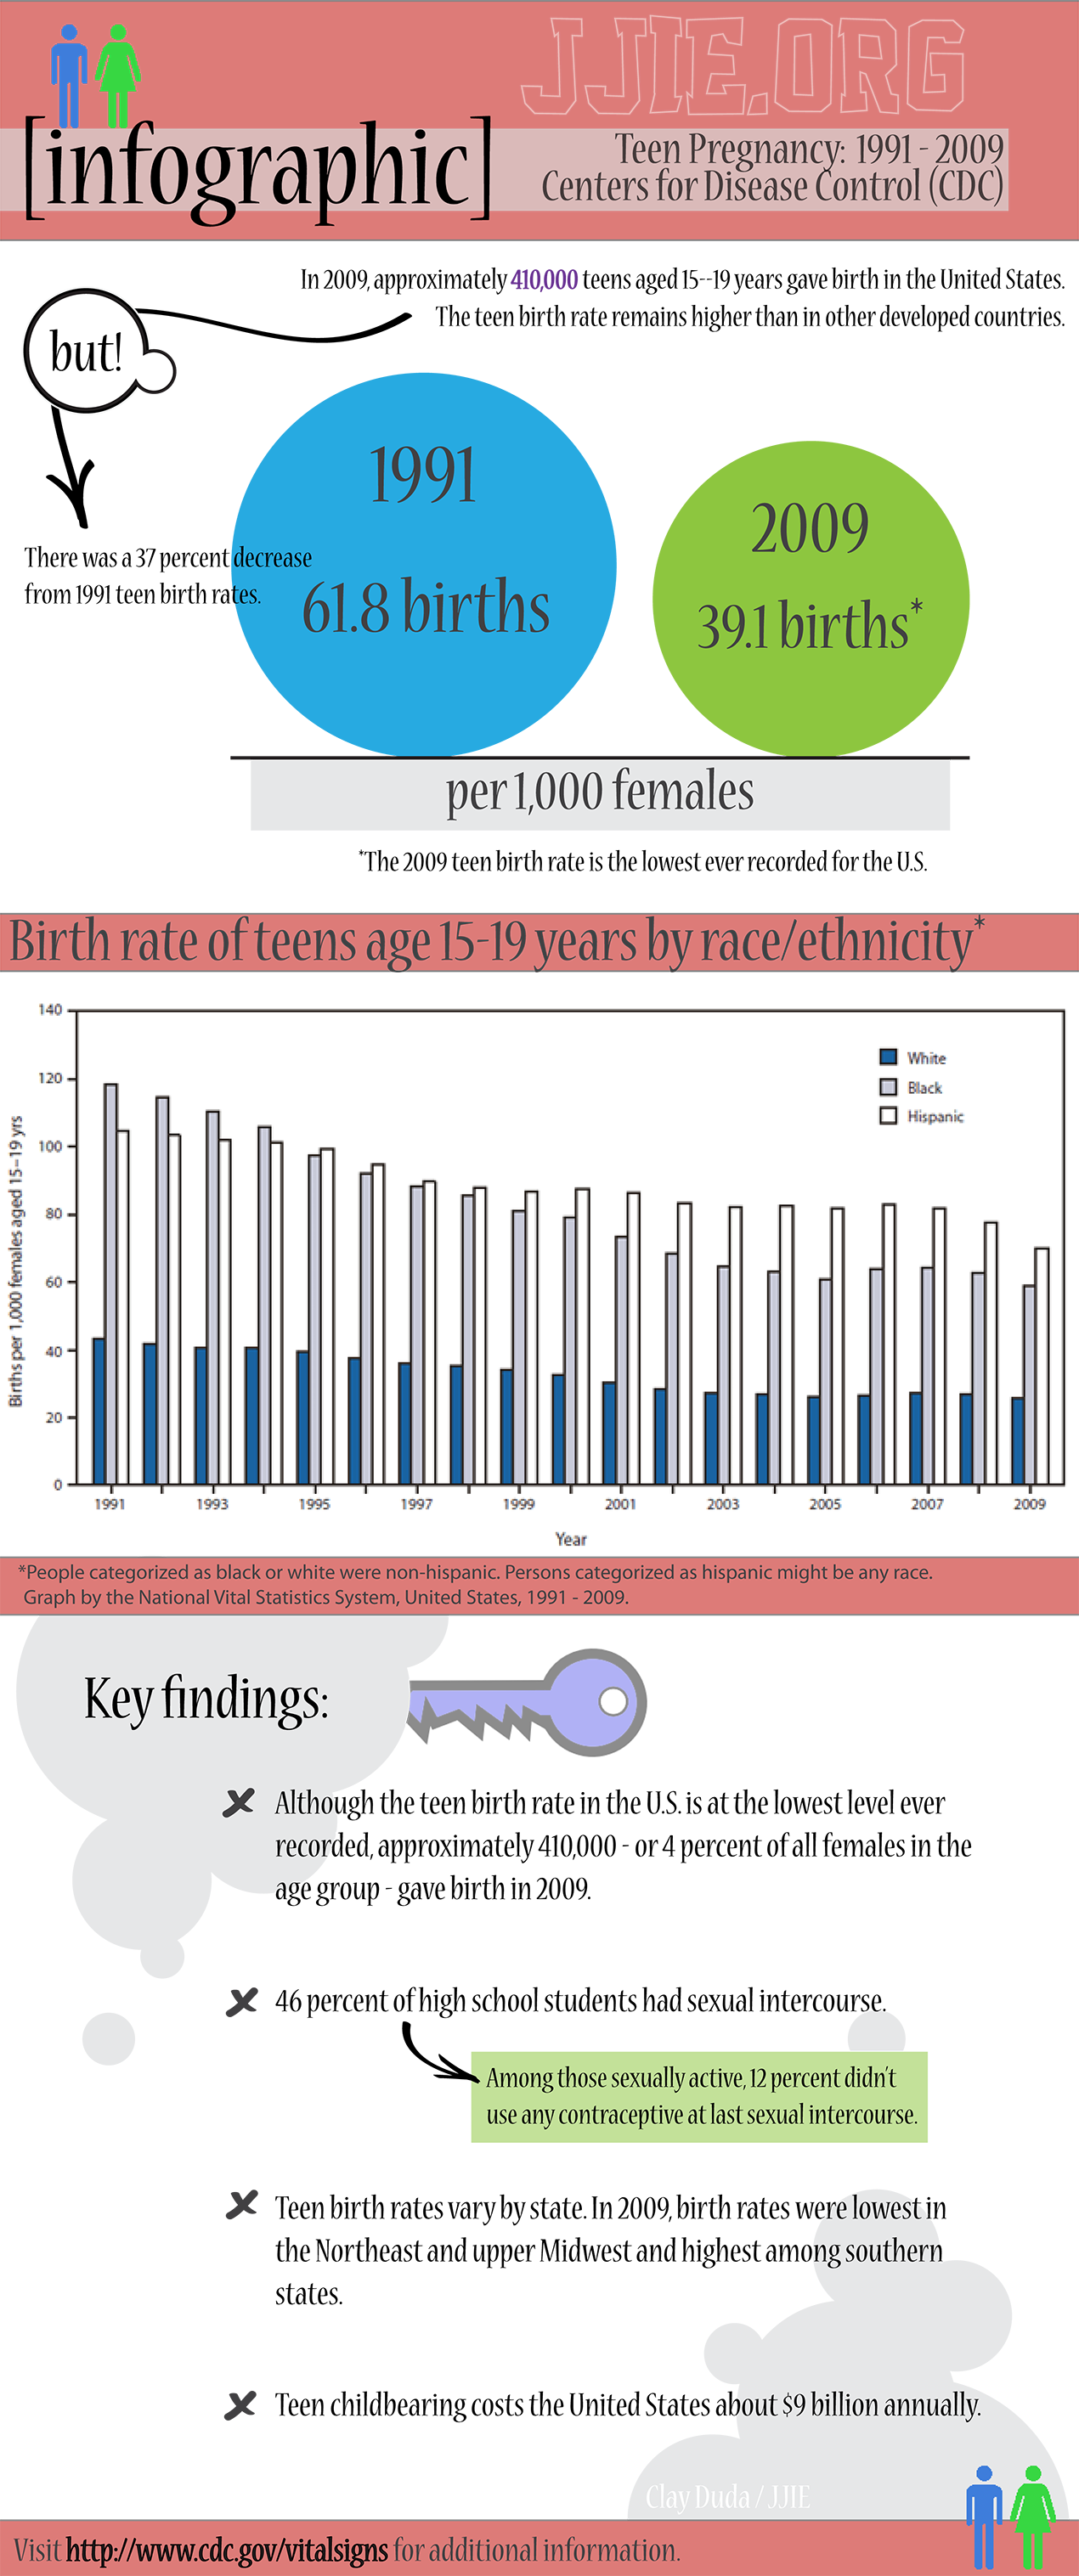 Teen pregnancy statistics from the CDC